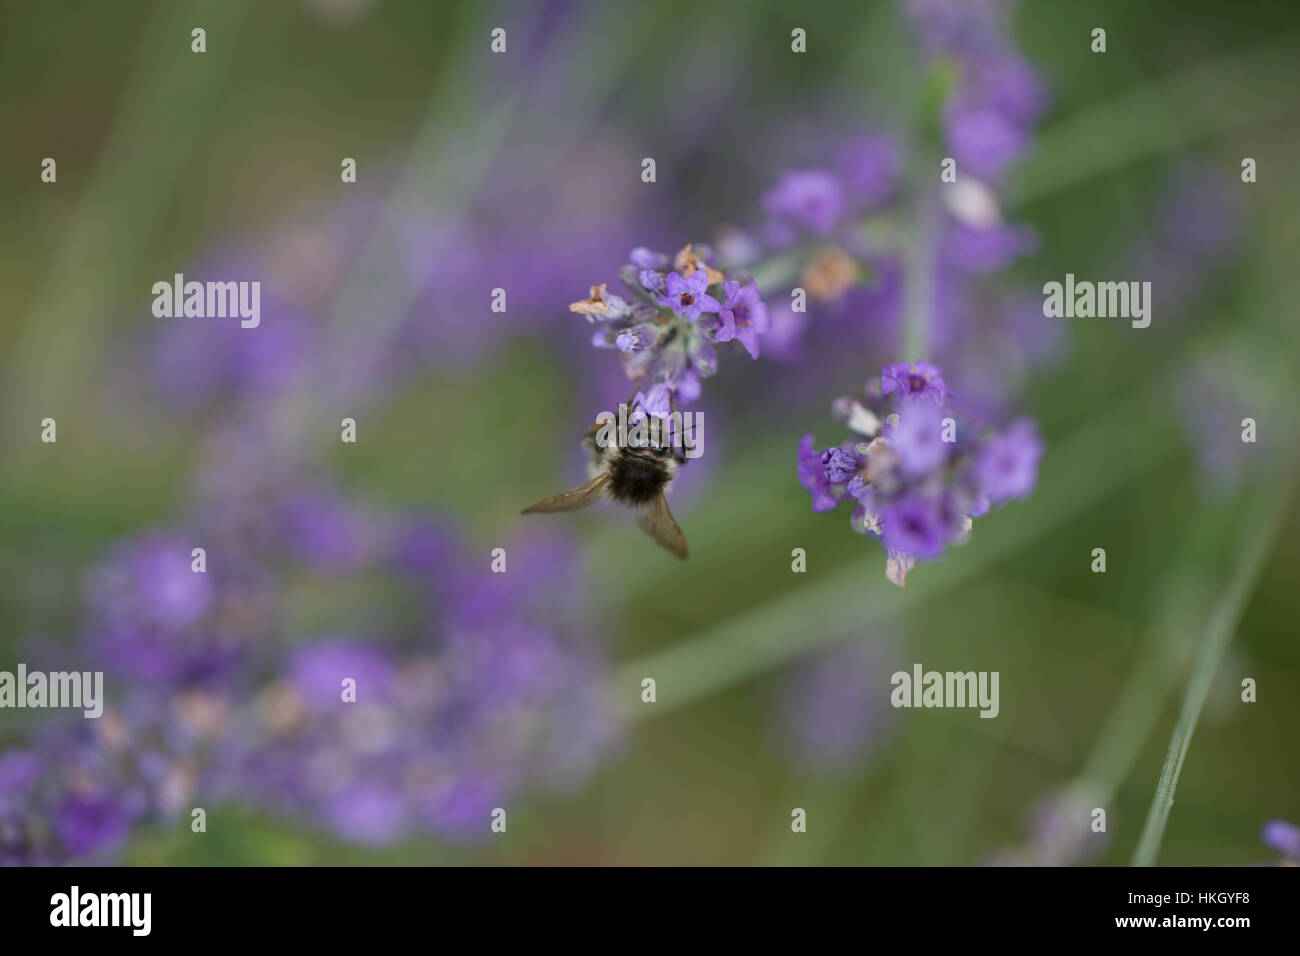 bee on purple flower. lavender, insect, nature, growth. Stock Photo